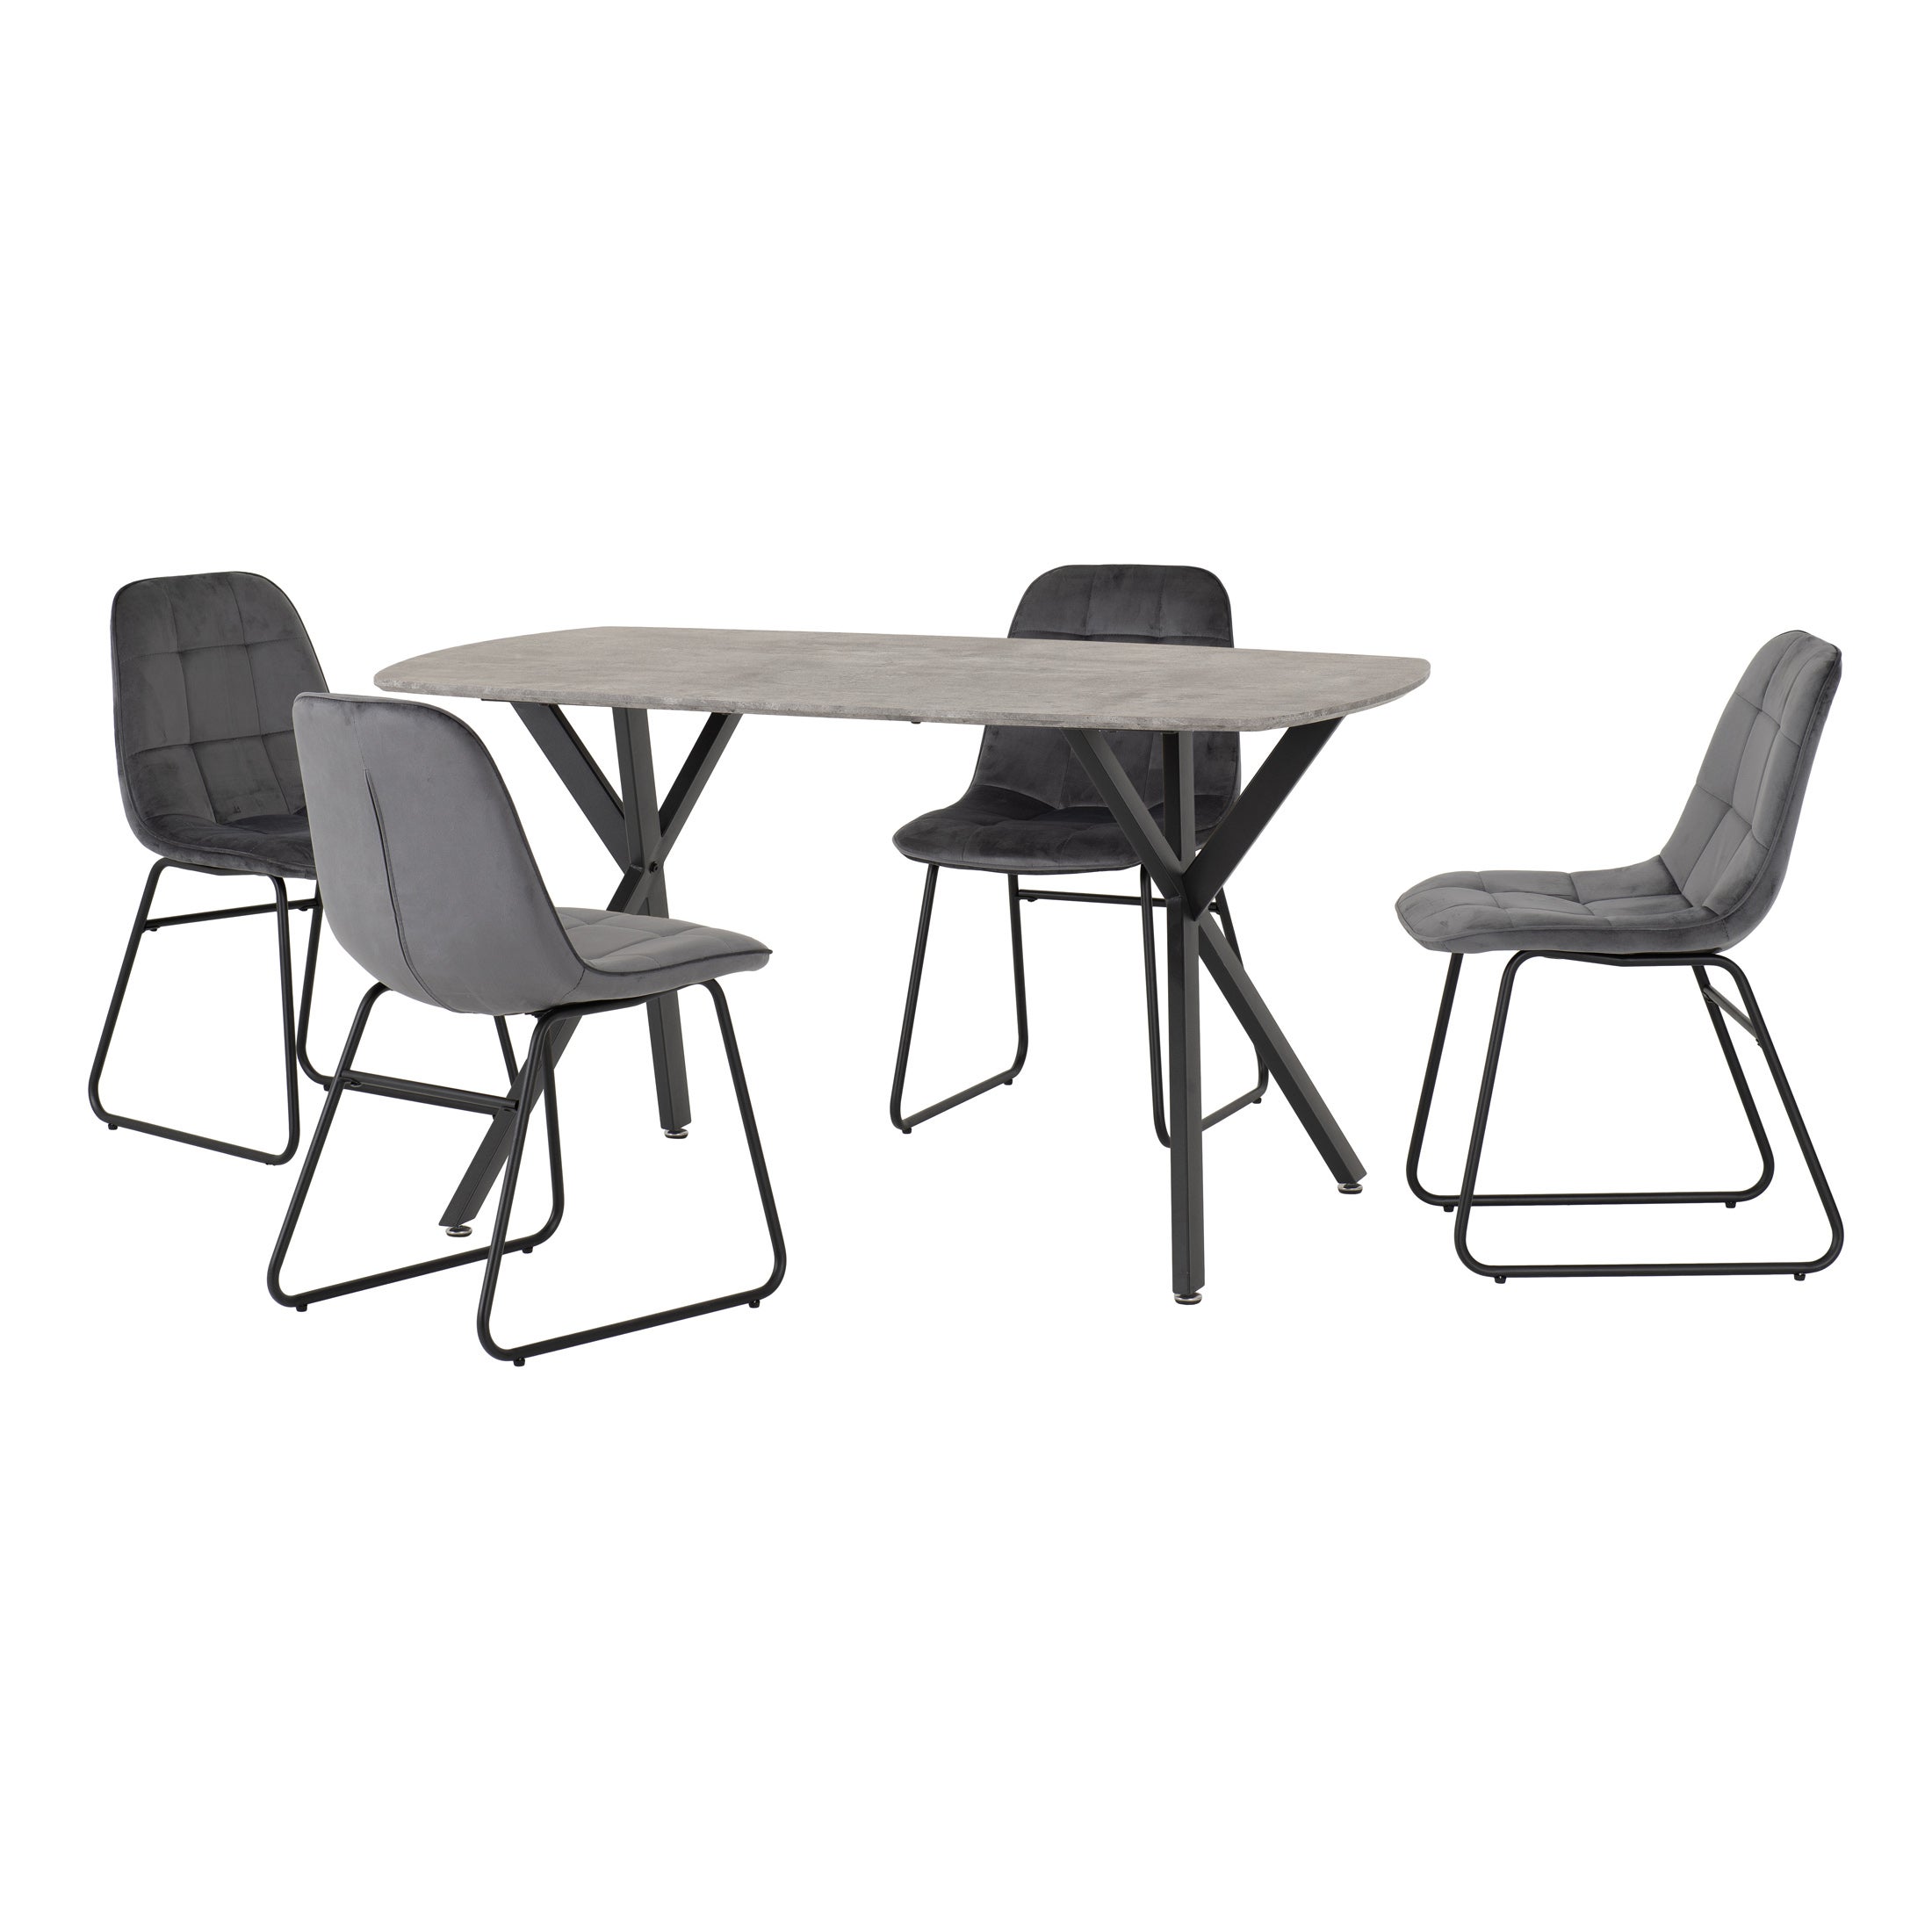 Athens Rectangular Dining Table With 4 Lukas Chairs Concrete Effect Grey